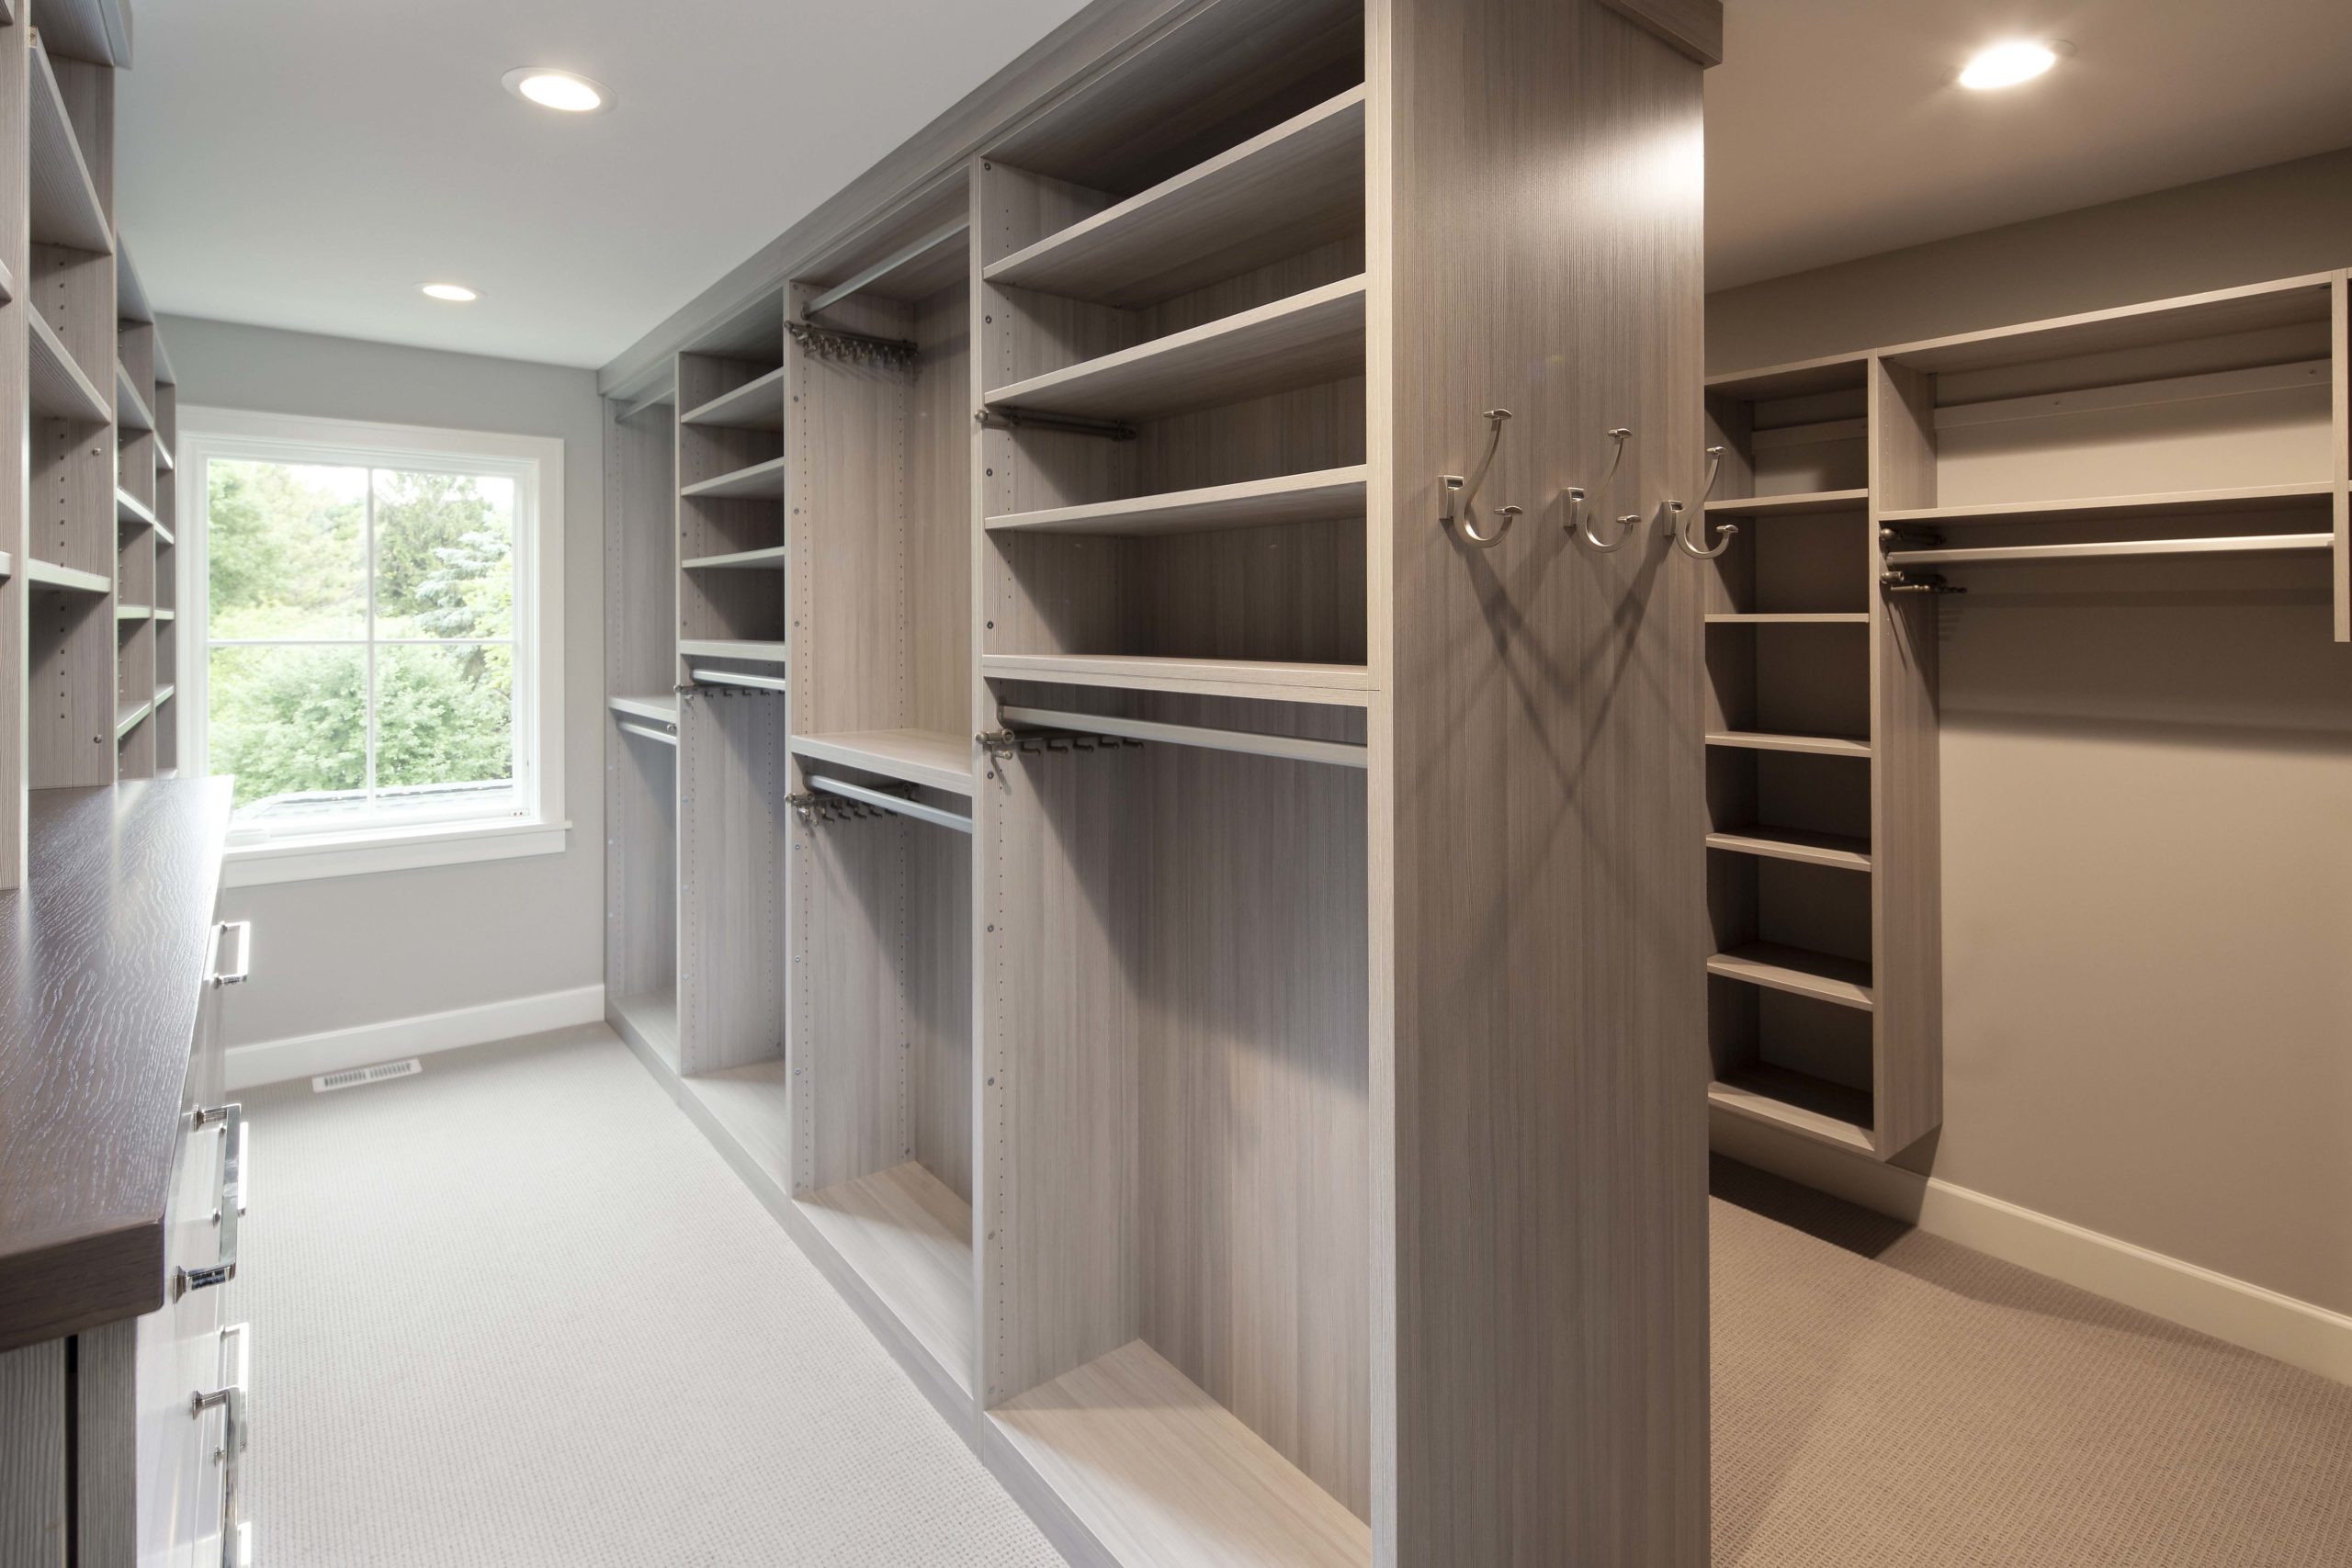 A walk in closet with shelves and drawers.